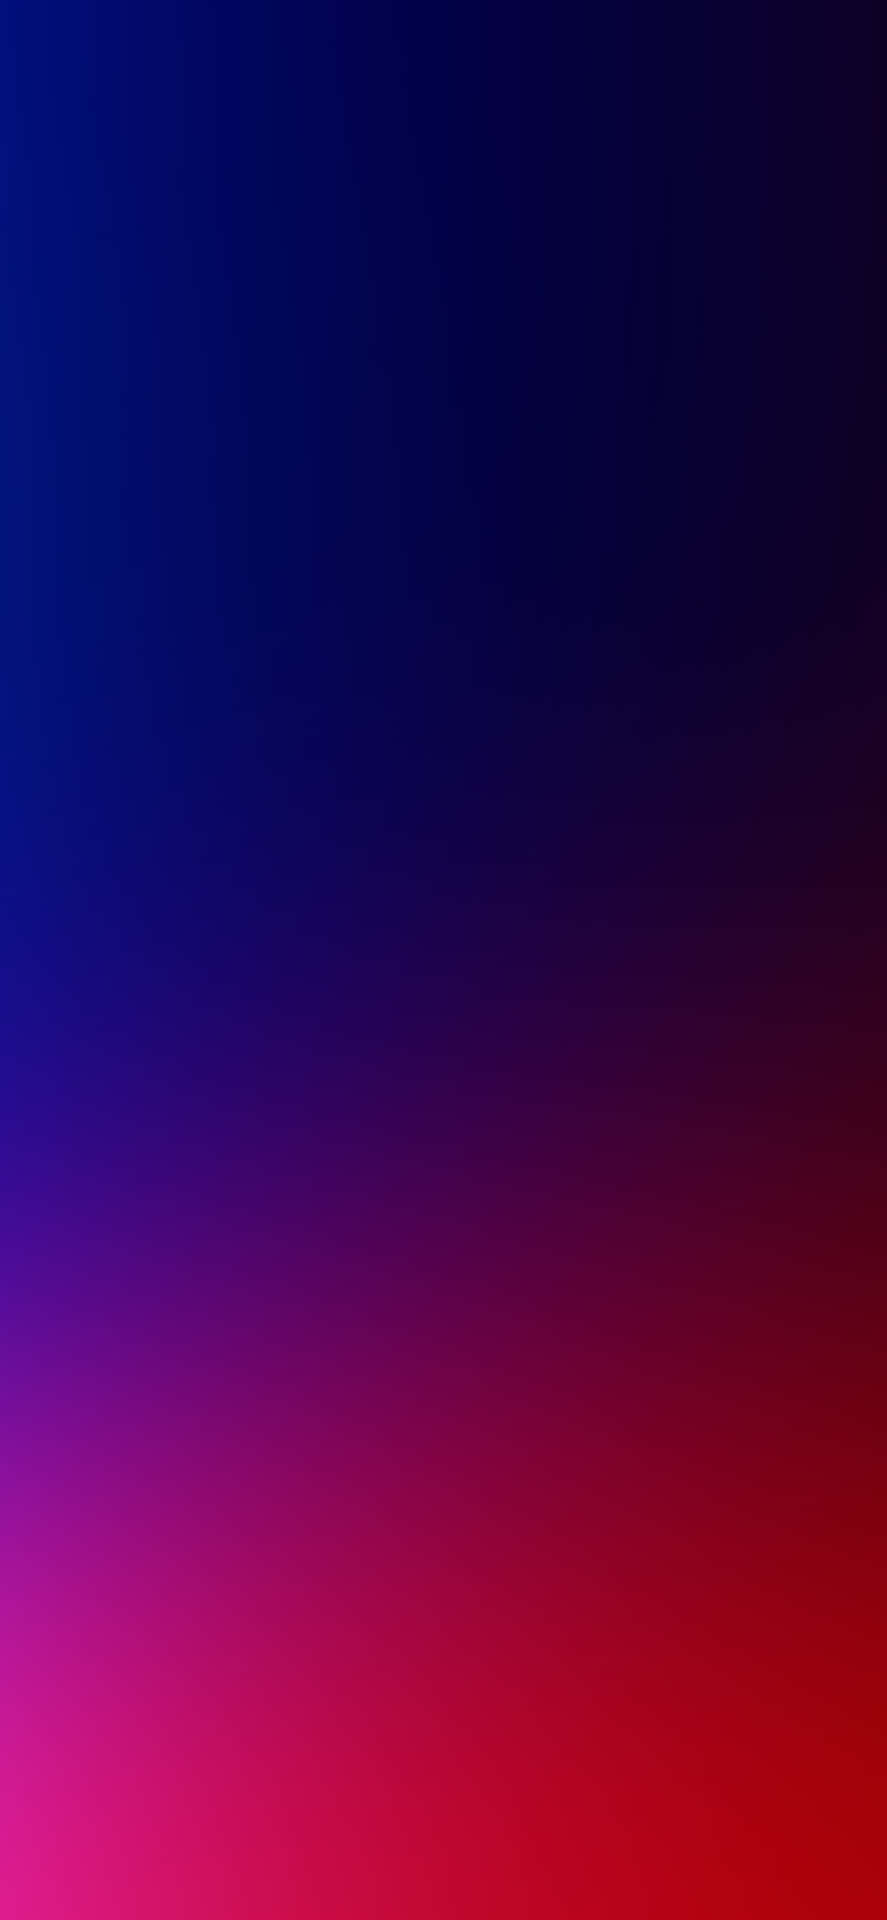 Get the perfect balance of colour with the Red and Blue iPhone Wallpaper